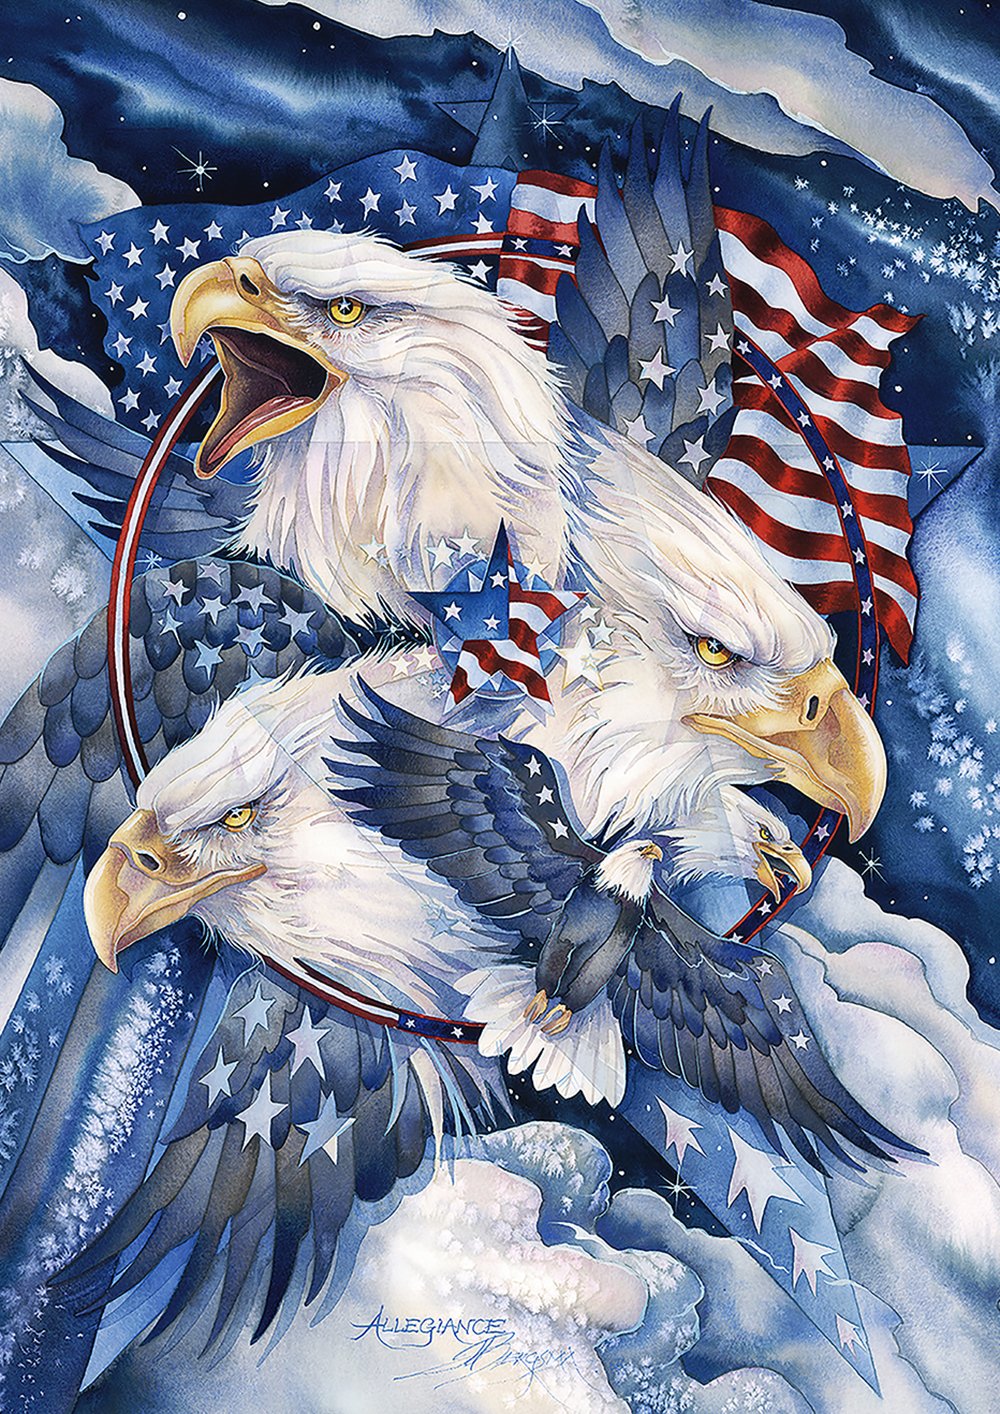 Toland Home Garden Fierce Allegiance Eagle Patriotic Flag Double Sided 12x18 Inch - image 1 of 5